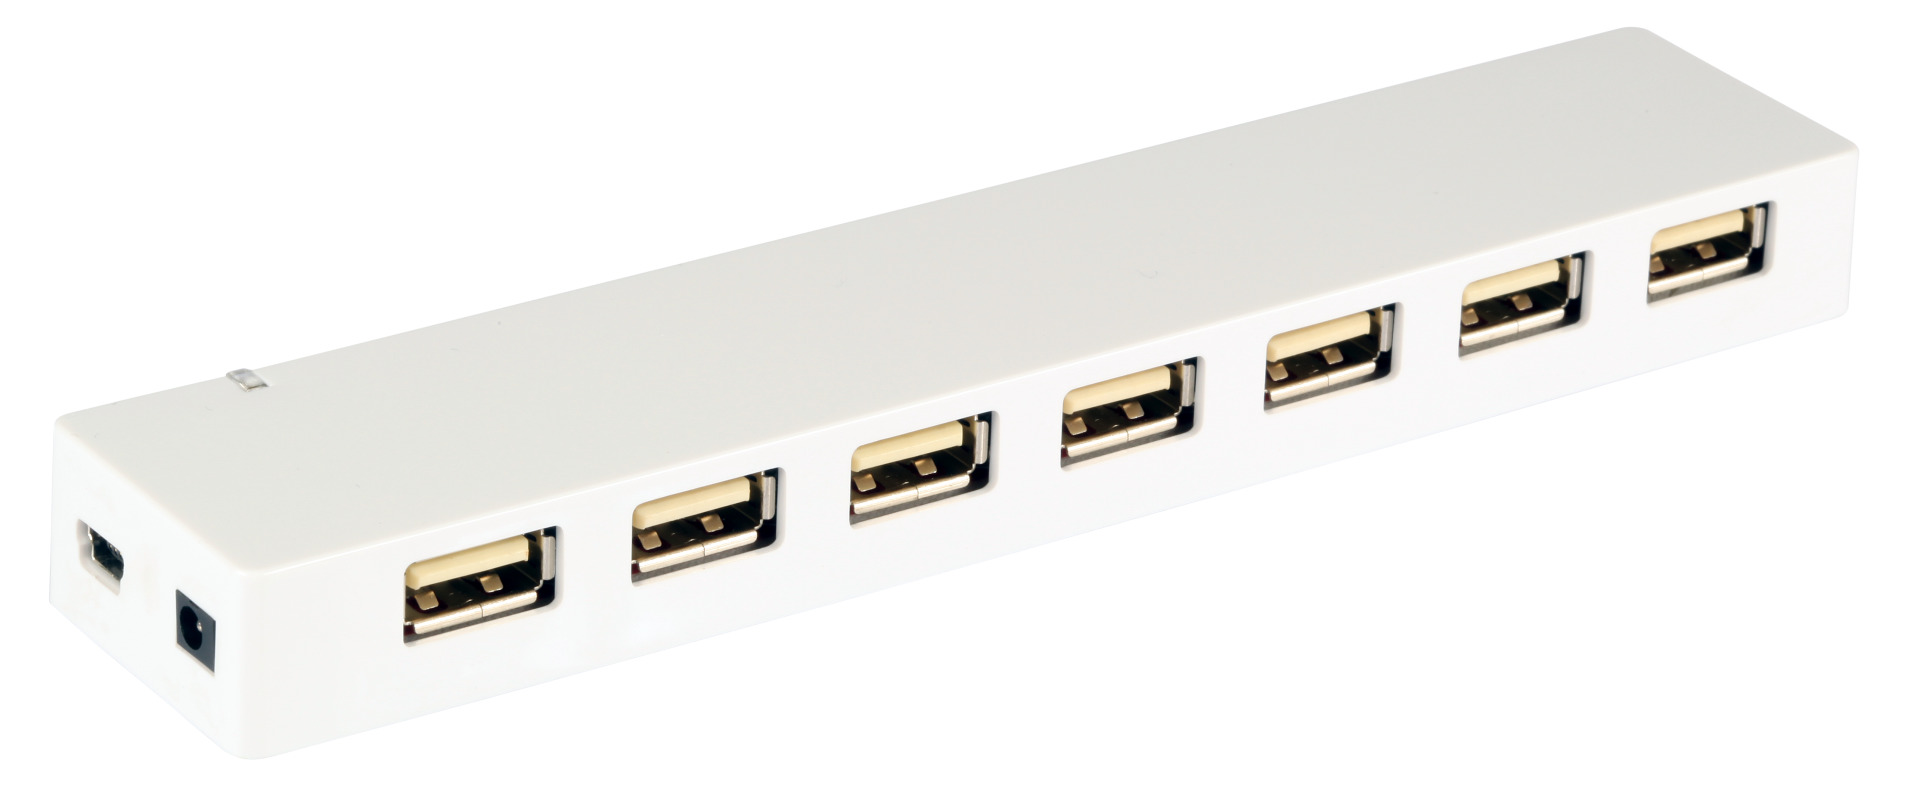 USB2.0 Hub 7-Port incl. 5V3A PS+Connection Cable